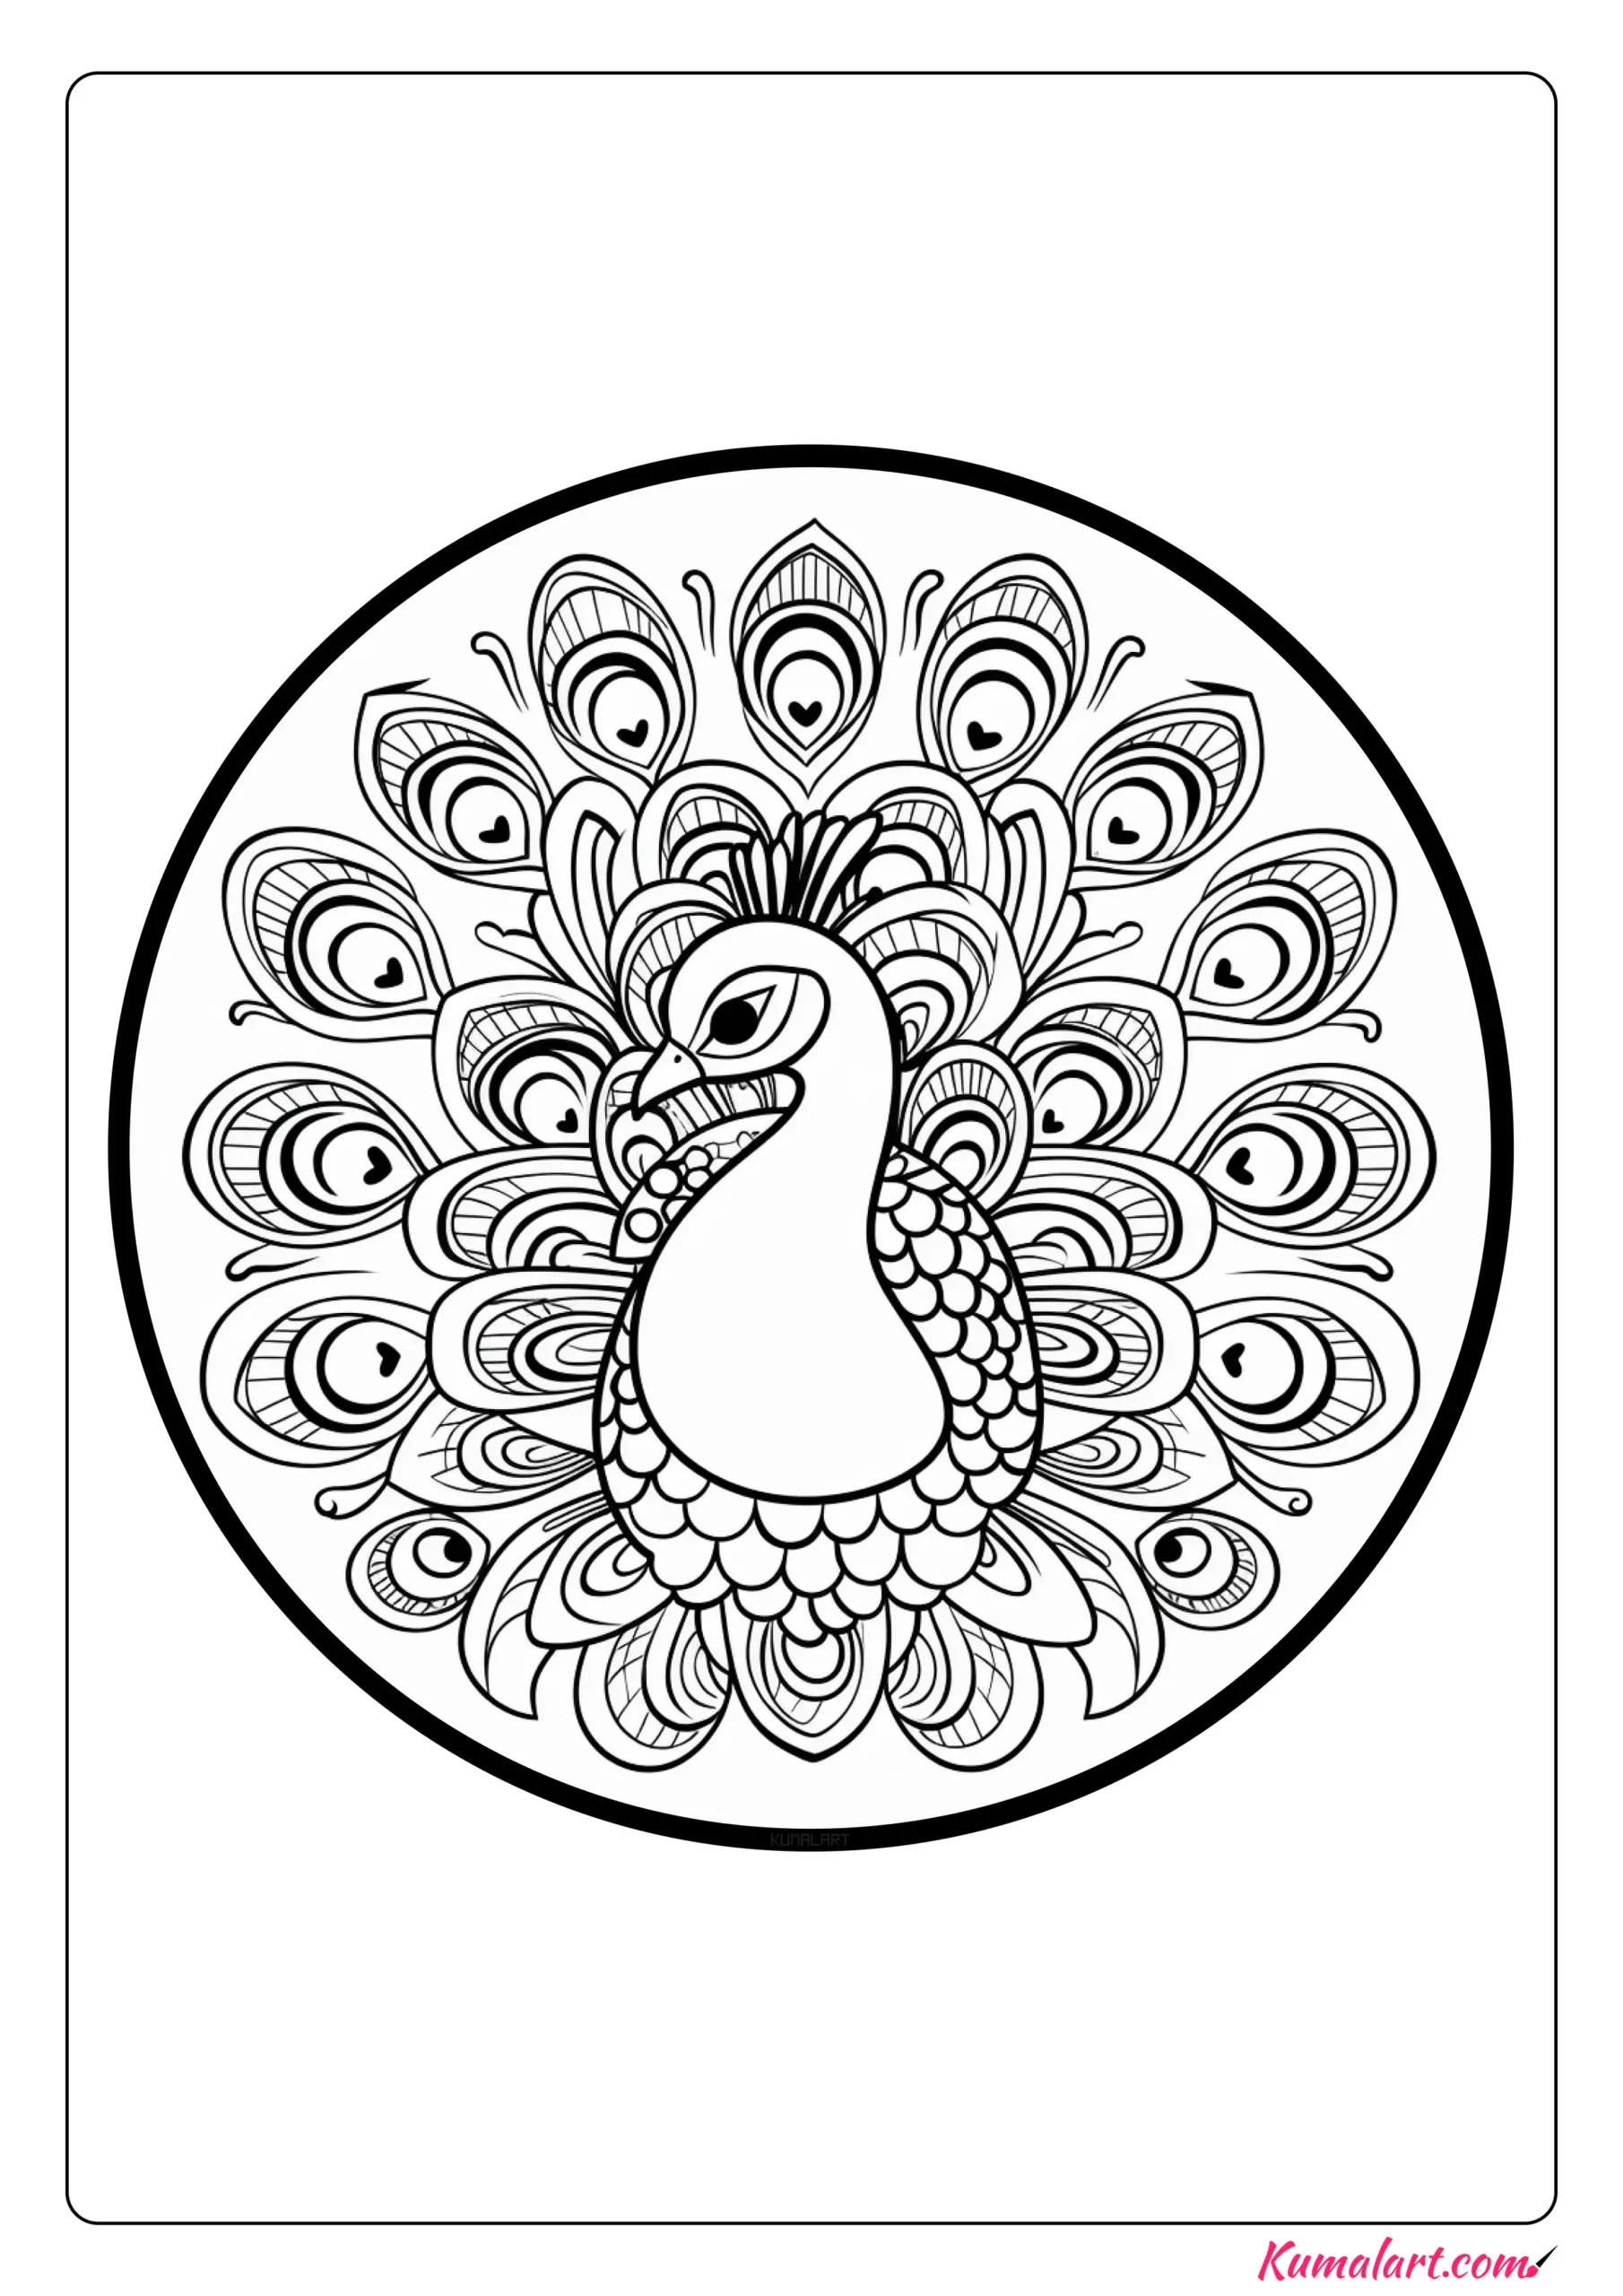 Alice the Peacock Mandala Coloring Page